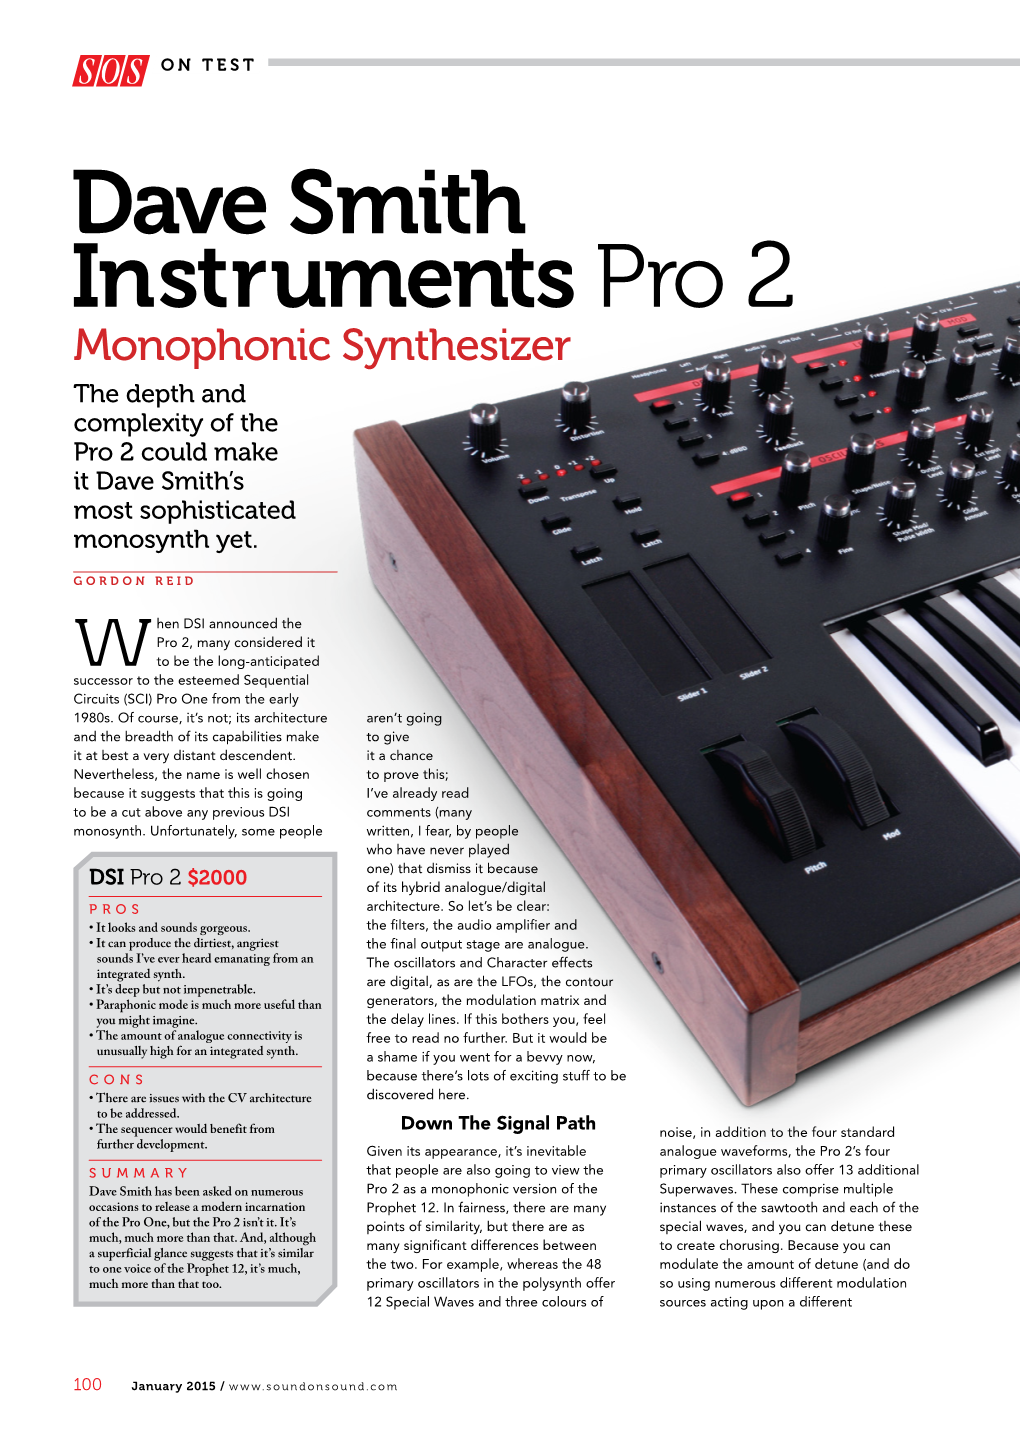 Dave Smith Instruments Pro 2 Monophonic Synthesizer the Depth and Complexity of the Pro 2 Could Make It Dave Smith’S Most Sophisticated Monosynth Yet